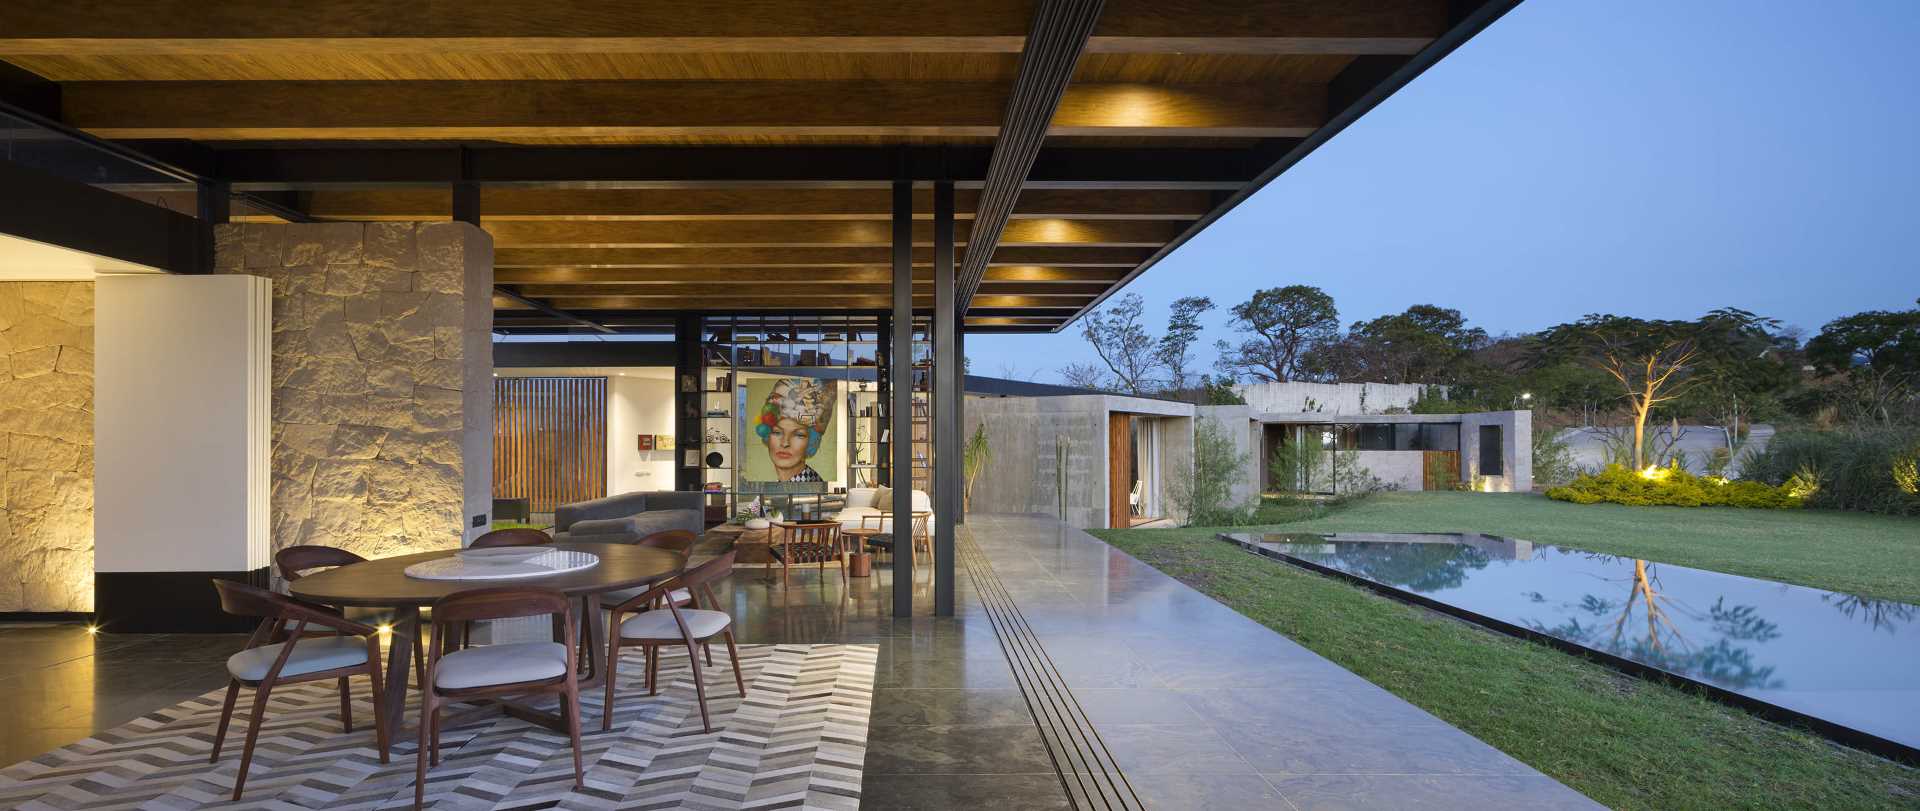 A modern dining room that opens to the outdoors and swimming pool.